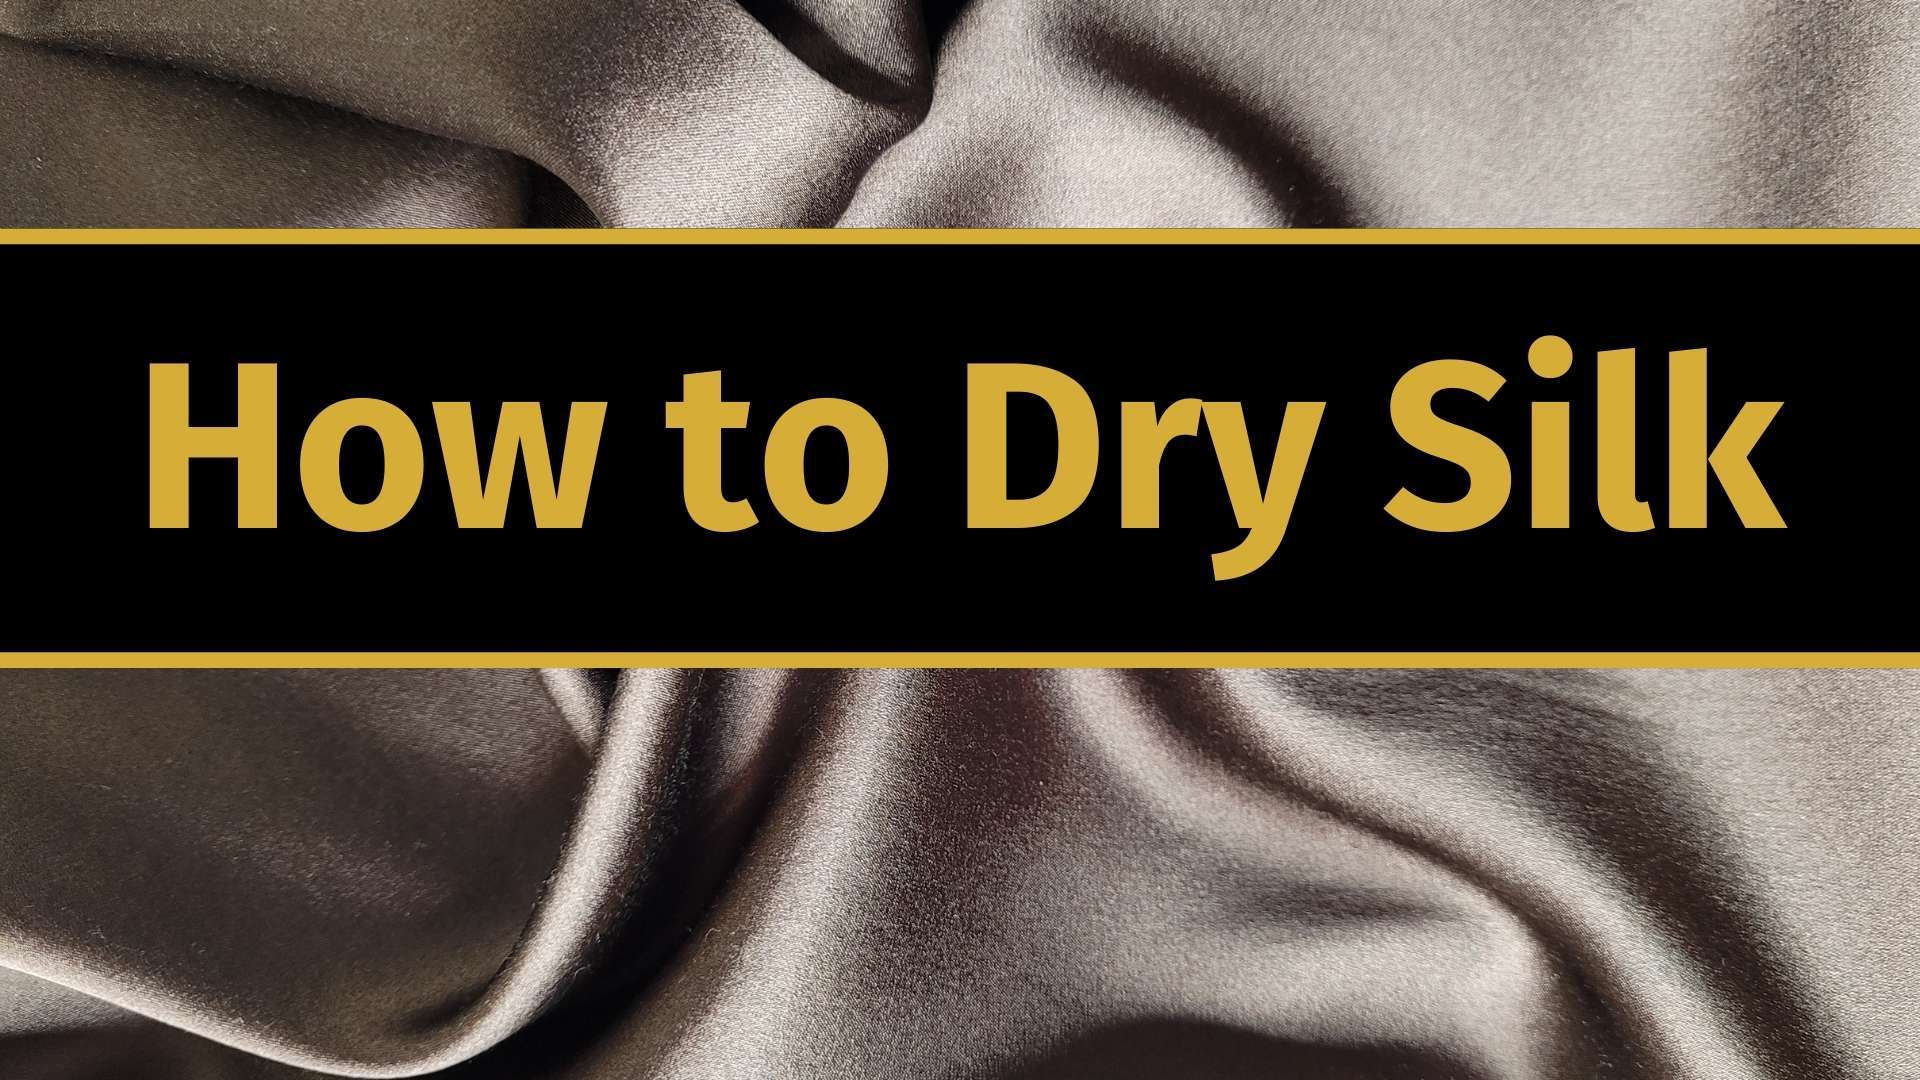 how to dry silk banner image